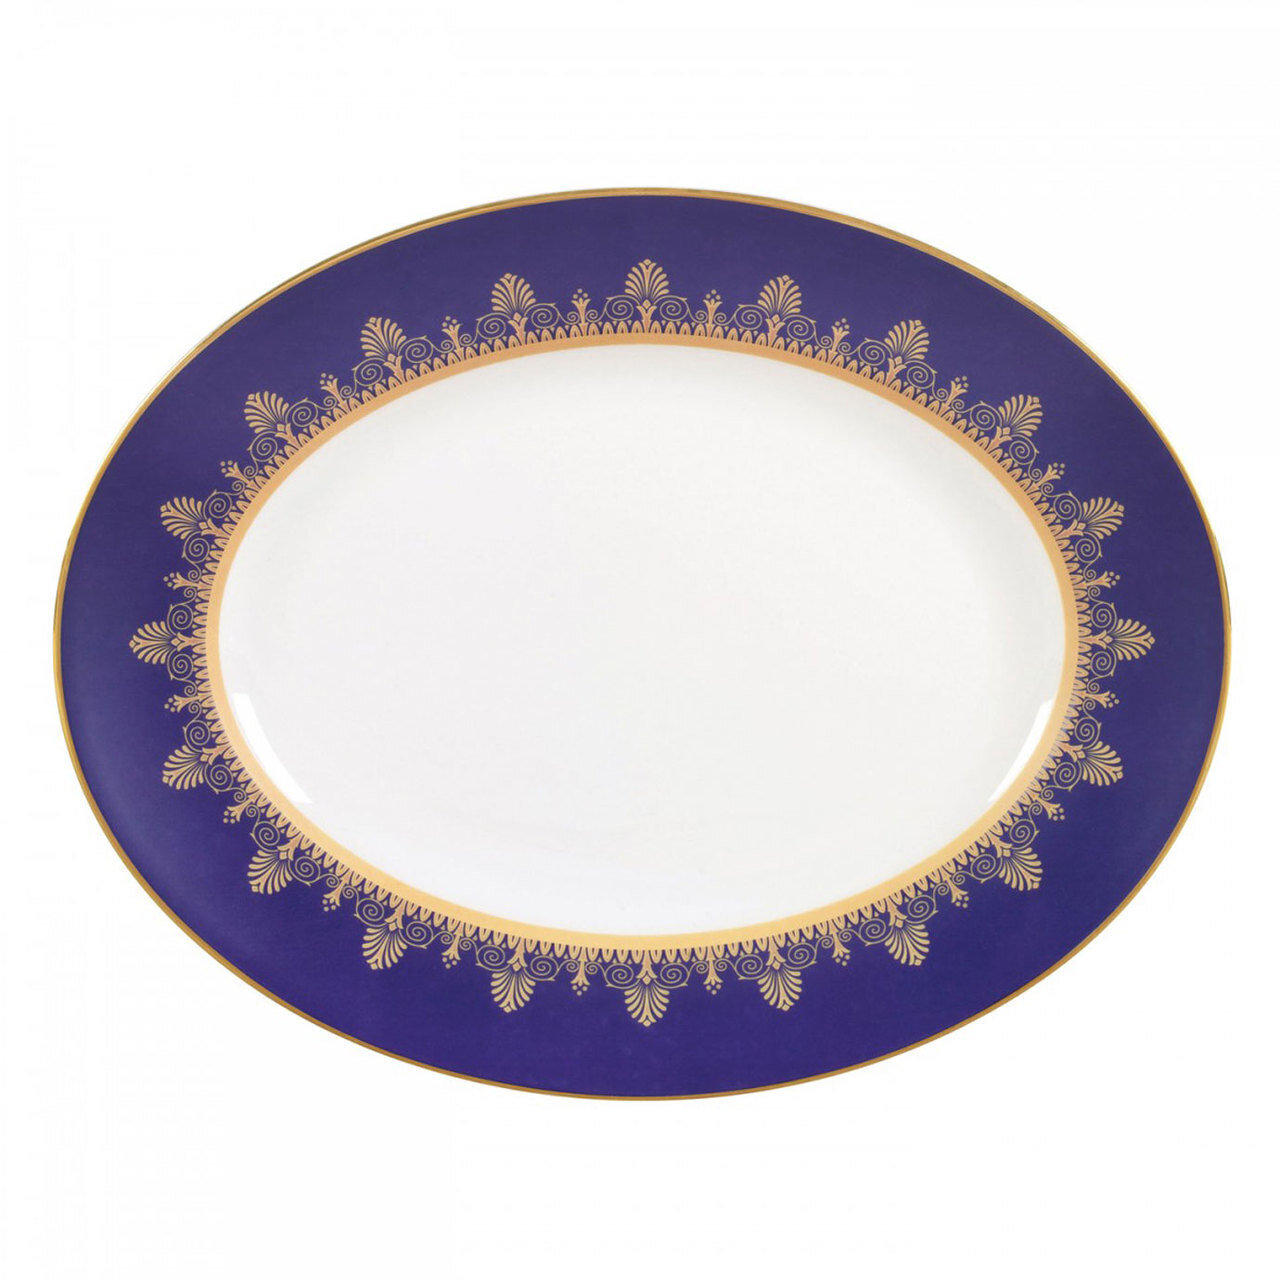 Wedgwood Anthemion Blue Oval Platter 13.75 Inch